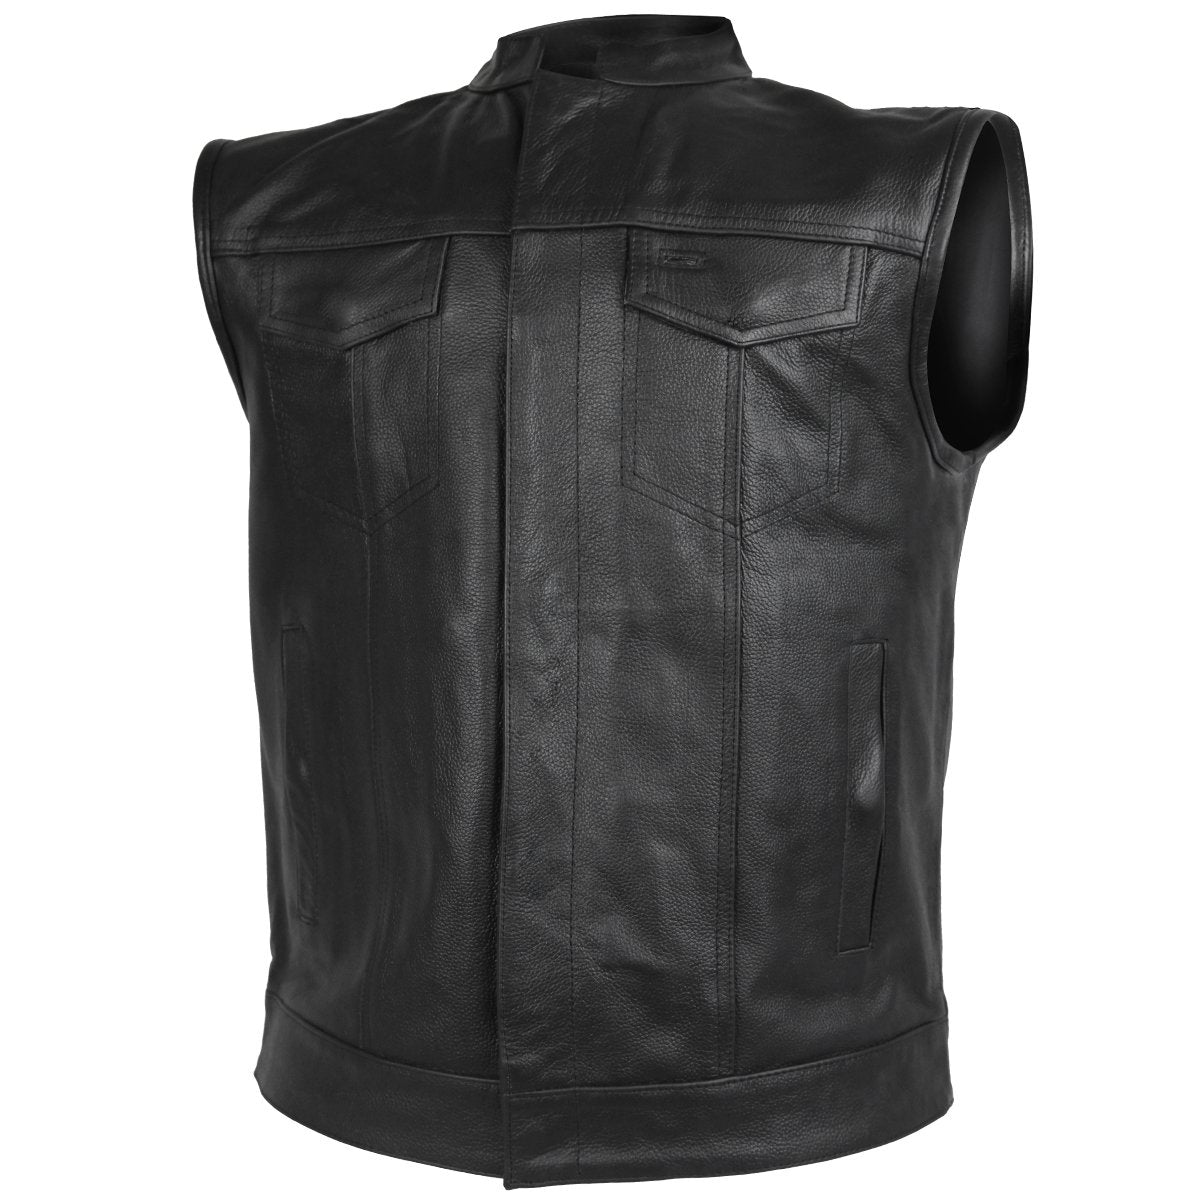 Vance Leather Zipper and Snap Closure Leather Motorcycle Club Vest